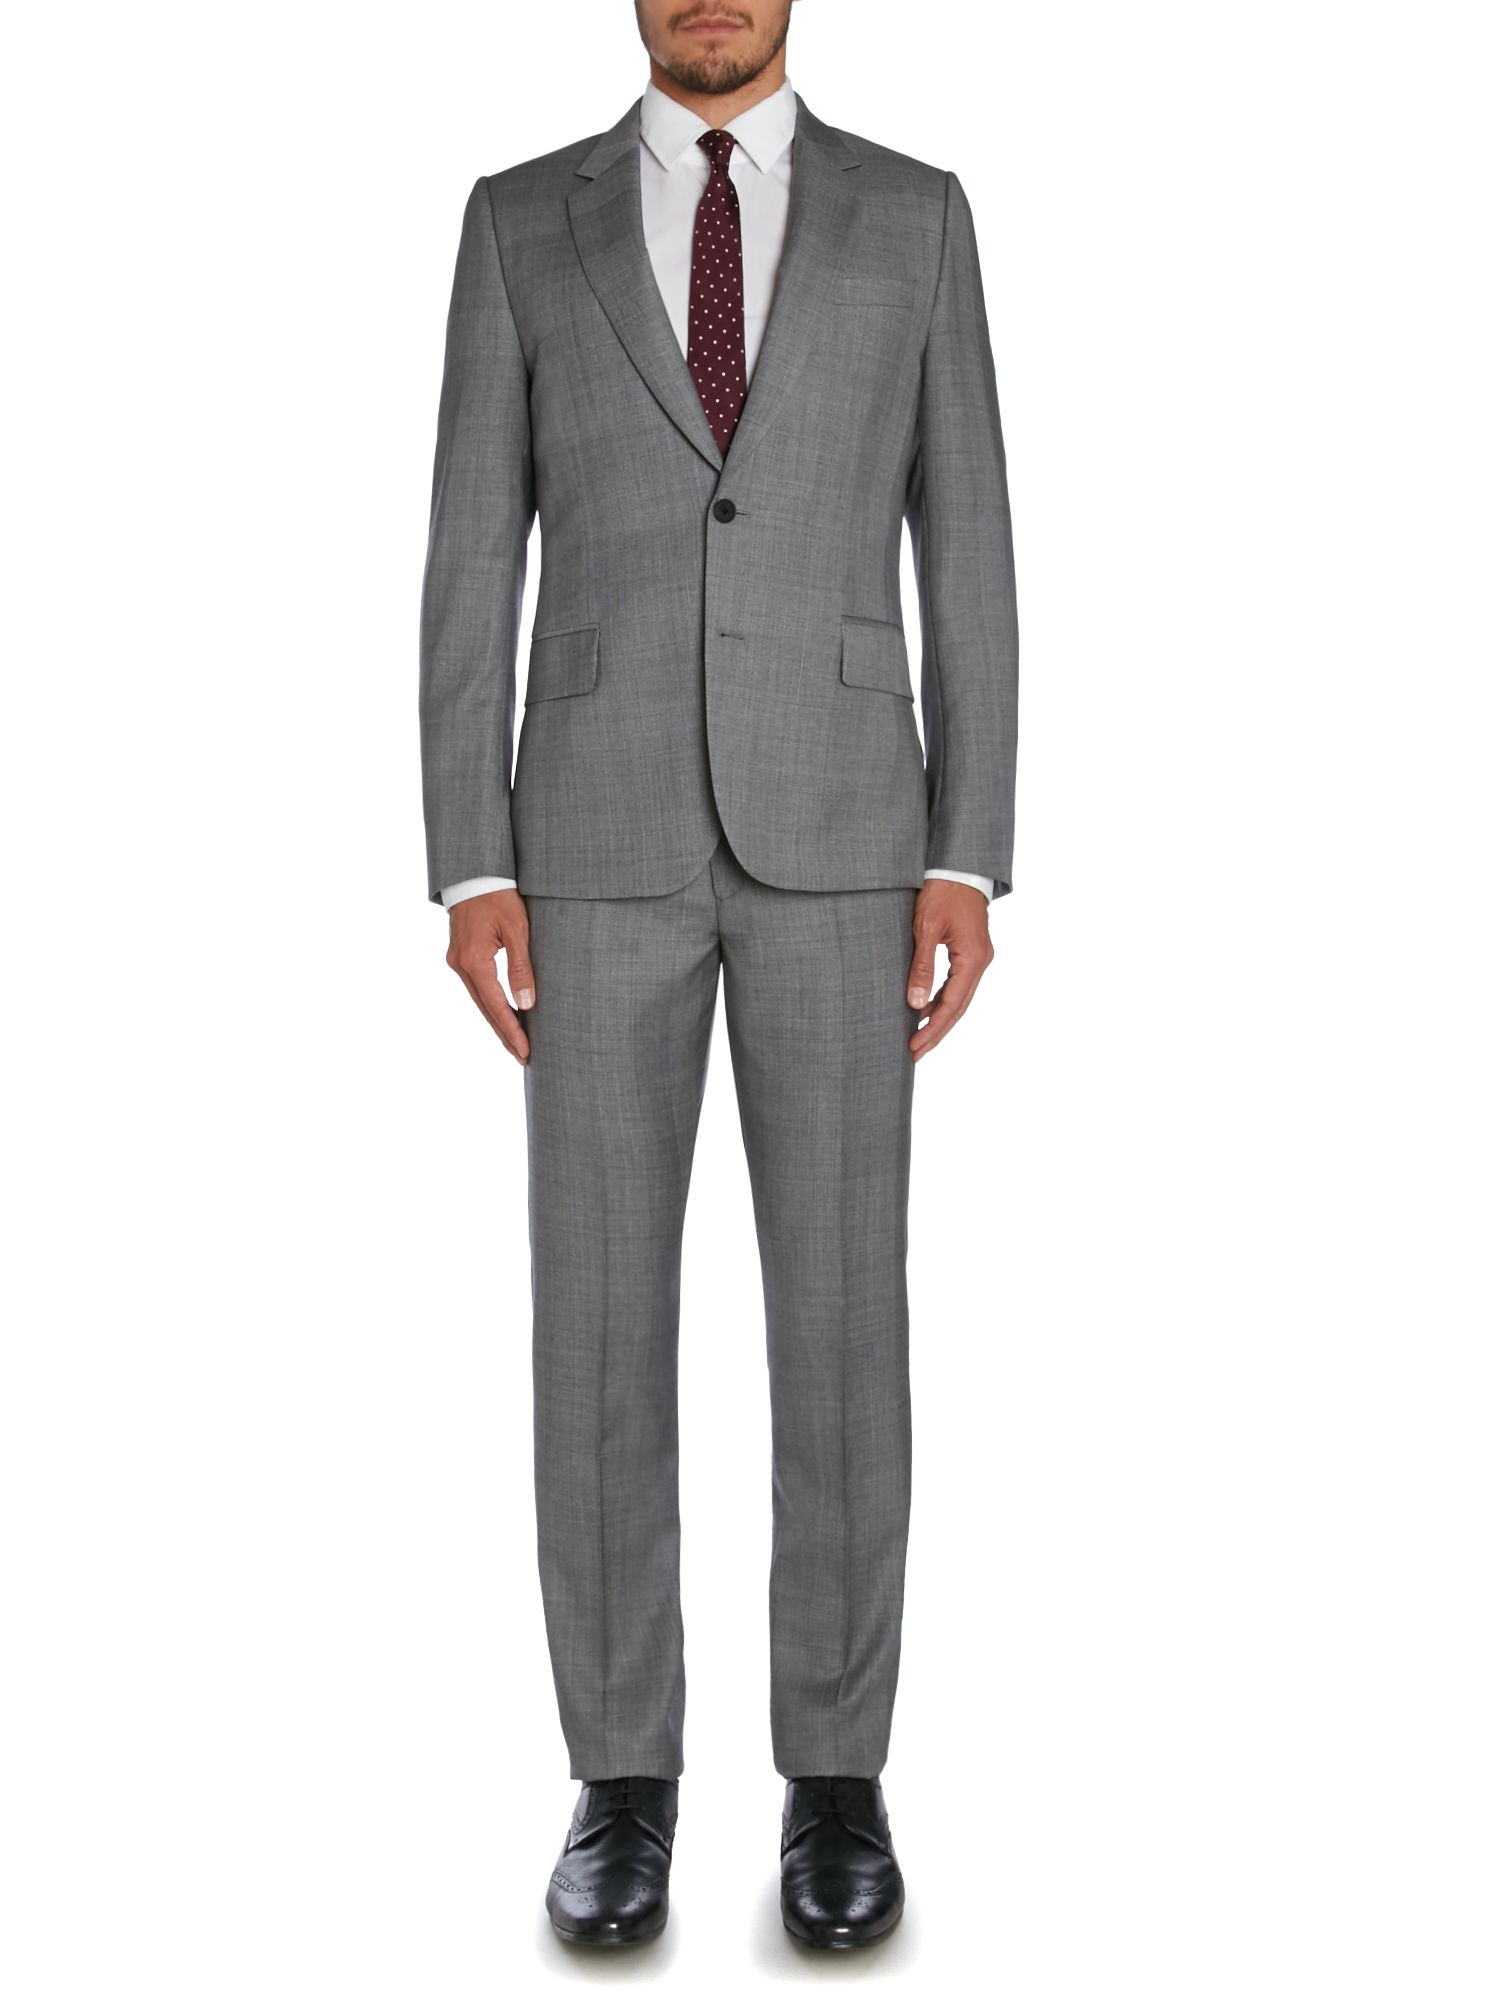 paul smith soho suit review